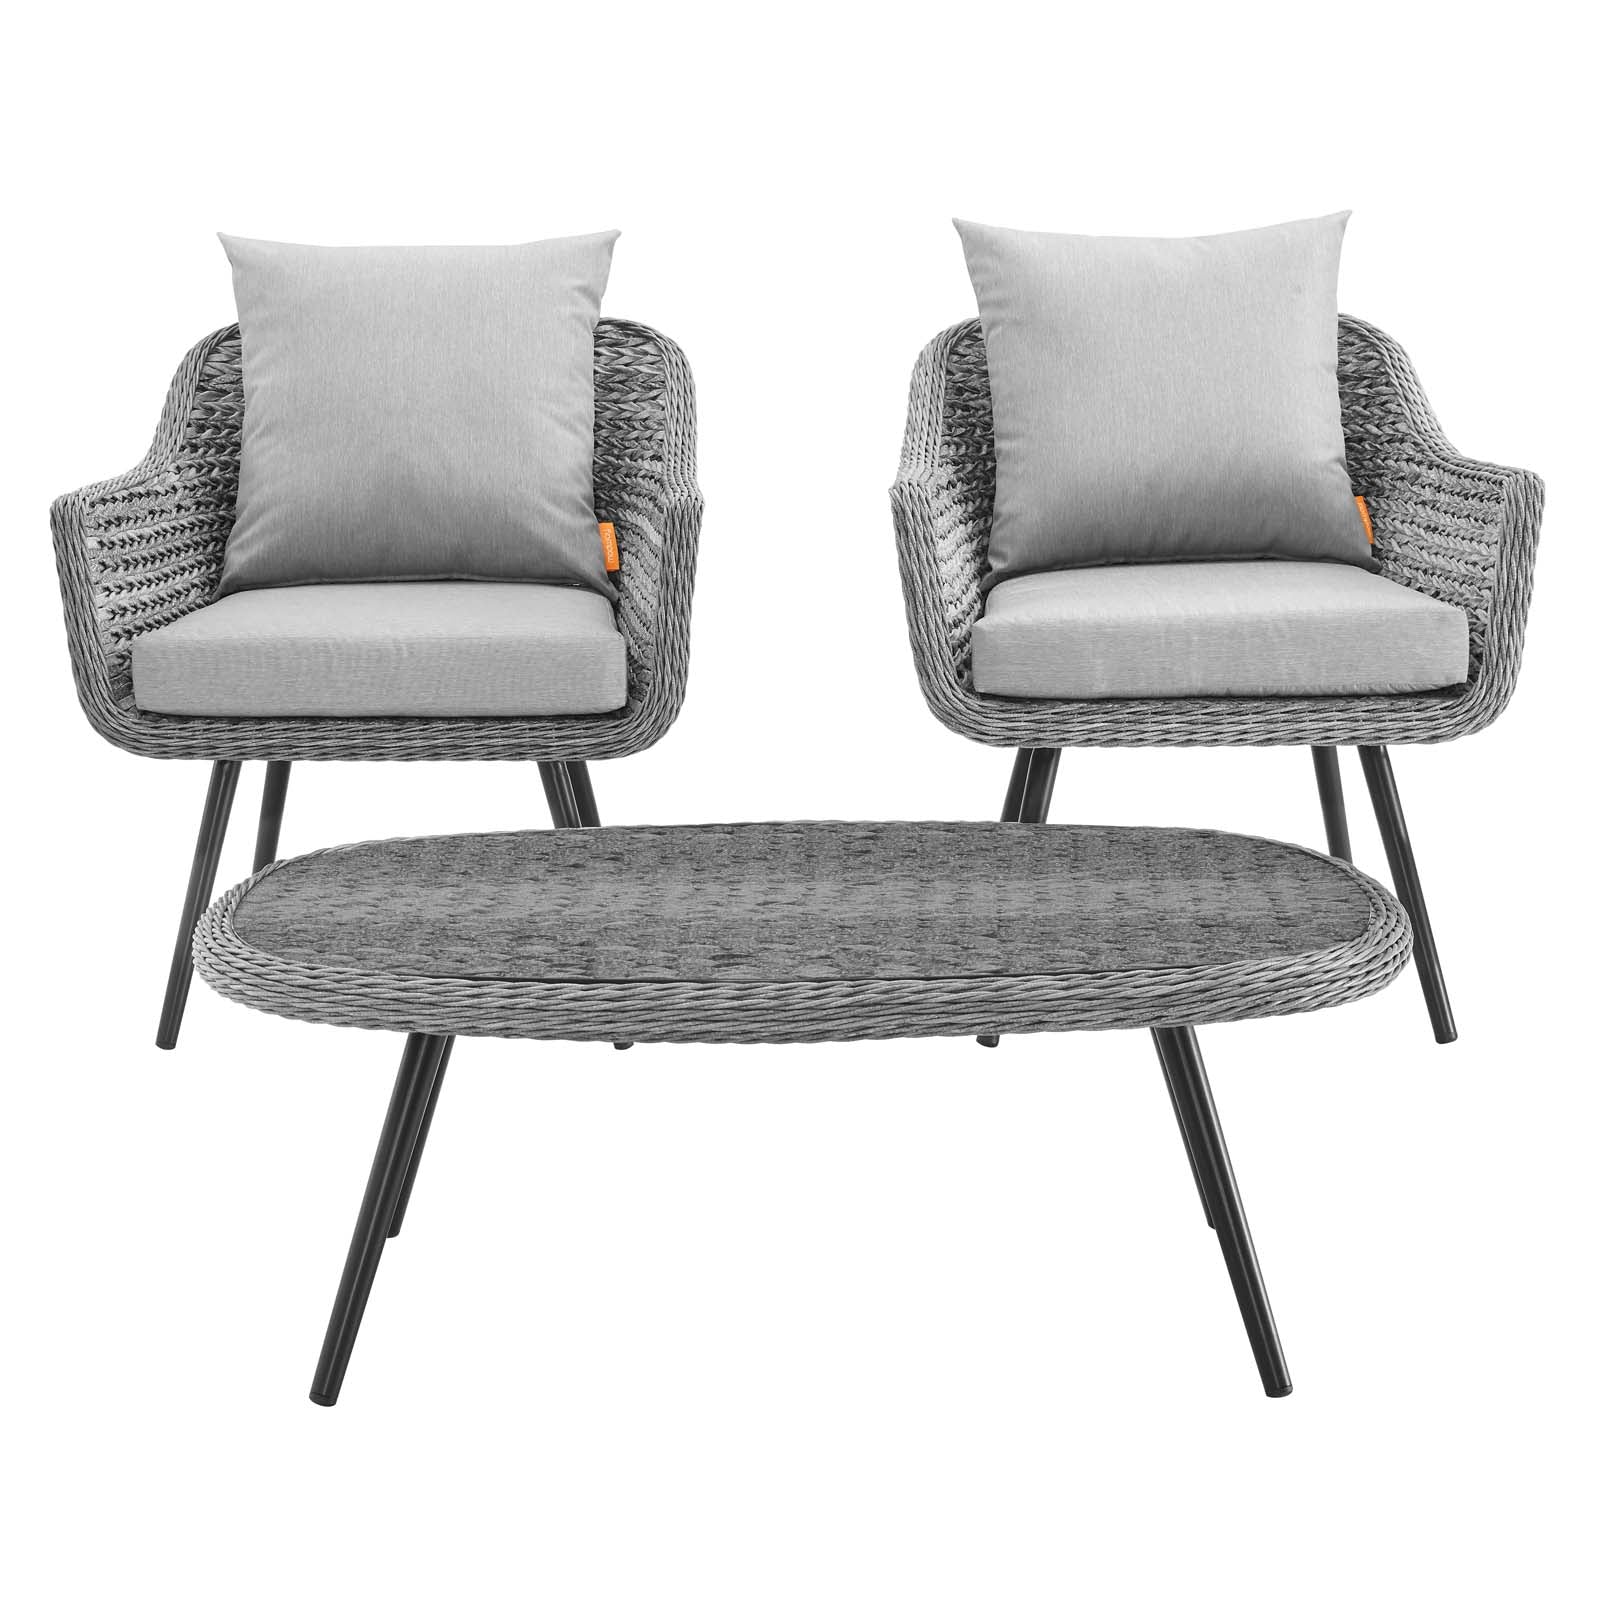 Endeavor 3 Piece Outdoor Patio Wicker Rattan Armchair and Coffee Table Set - East Shore Modern Home Furnishings